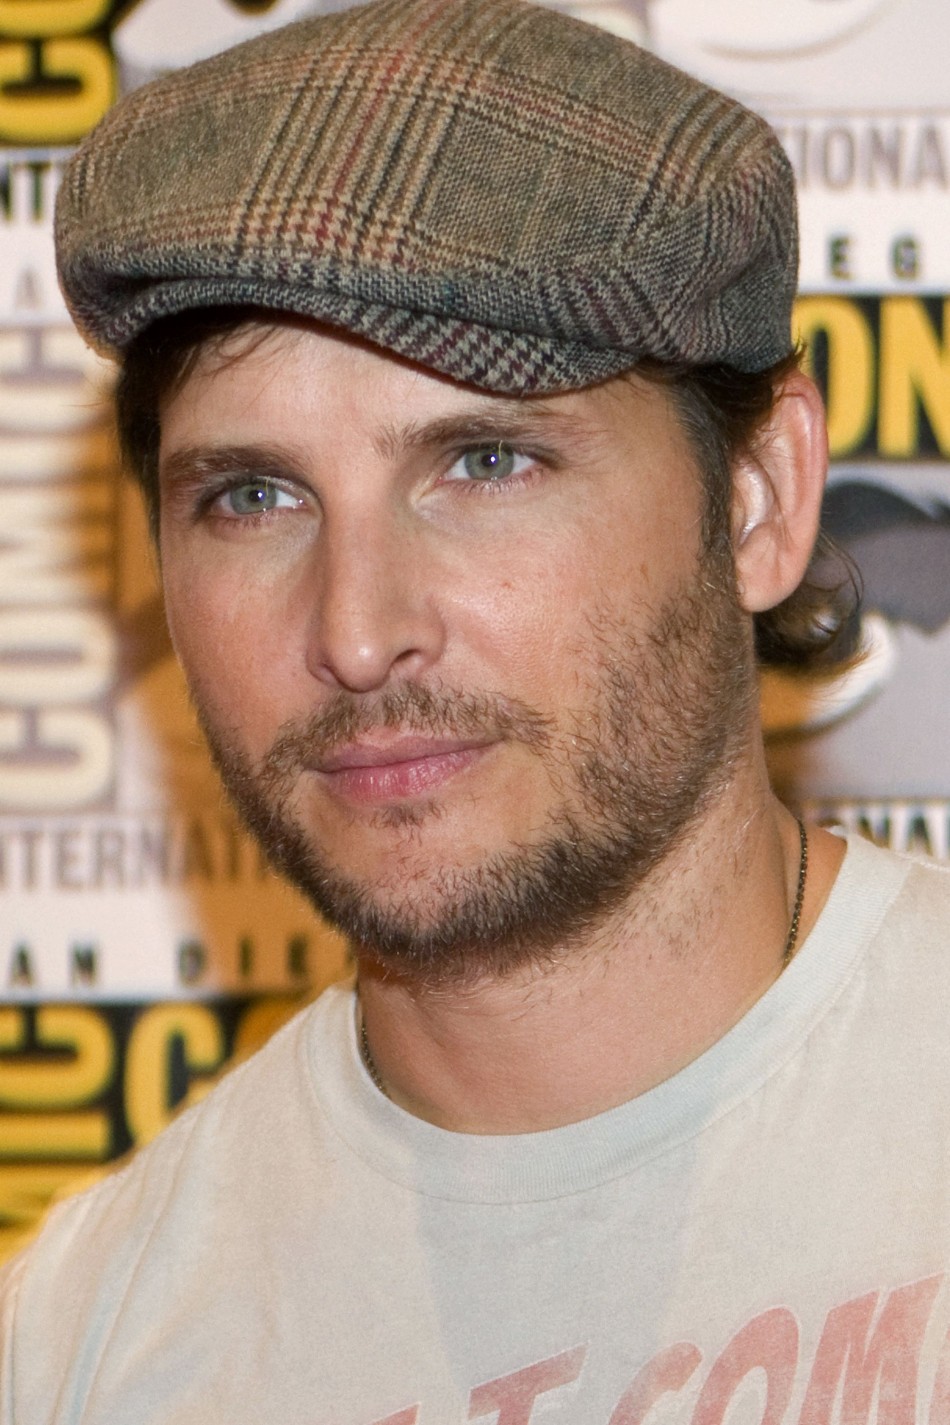 Cast member Peter Facinelli arrives for a panel discussion for quotThe Twilight Saga Breaking Dawn - Part 2quot at Comic-Con in San Diego